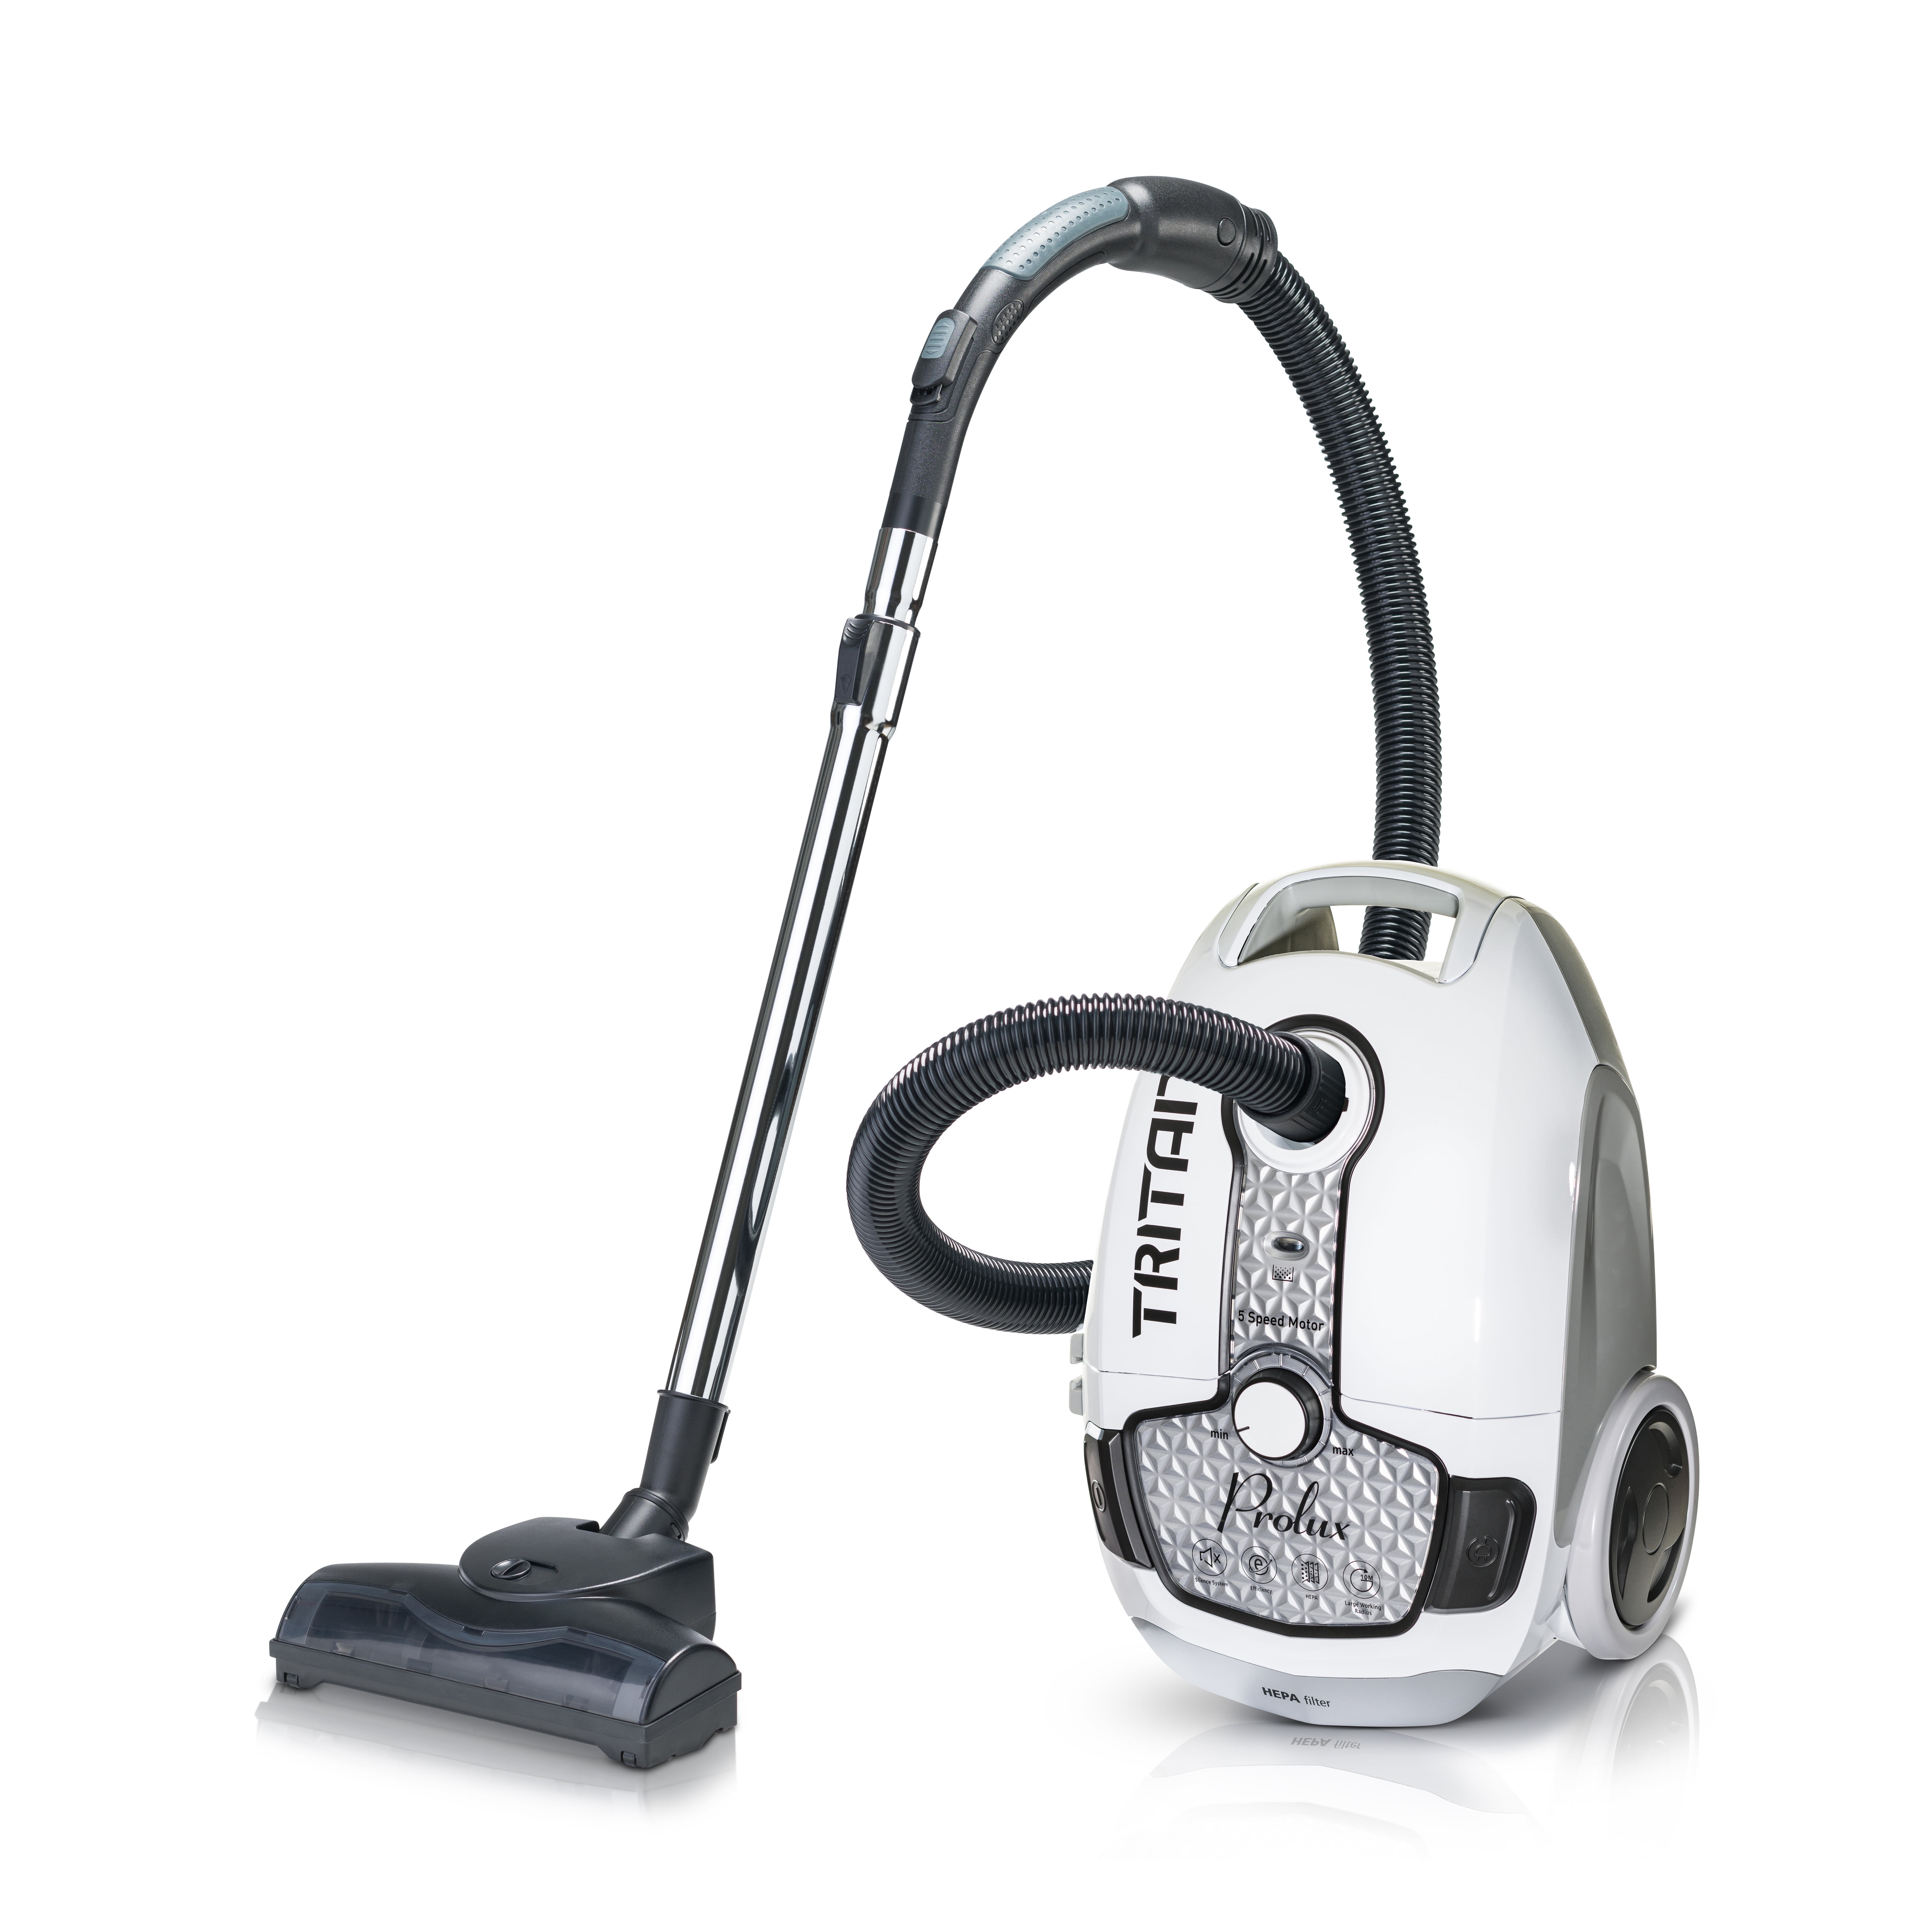 Prolux Tritan Canister Vacuum Hepa, Canister Or Upright Vacuum For Hardwood Floors